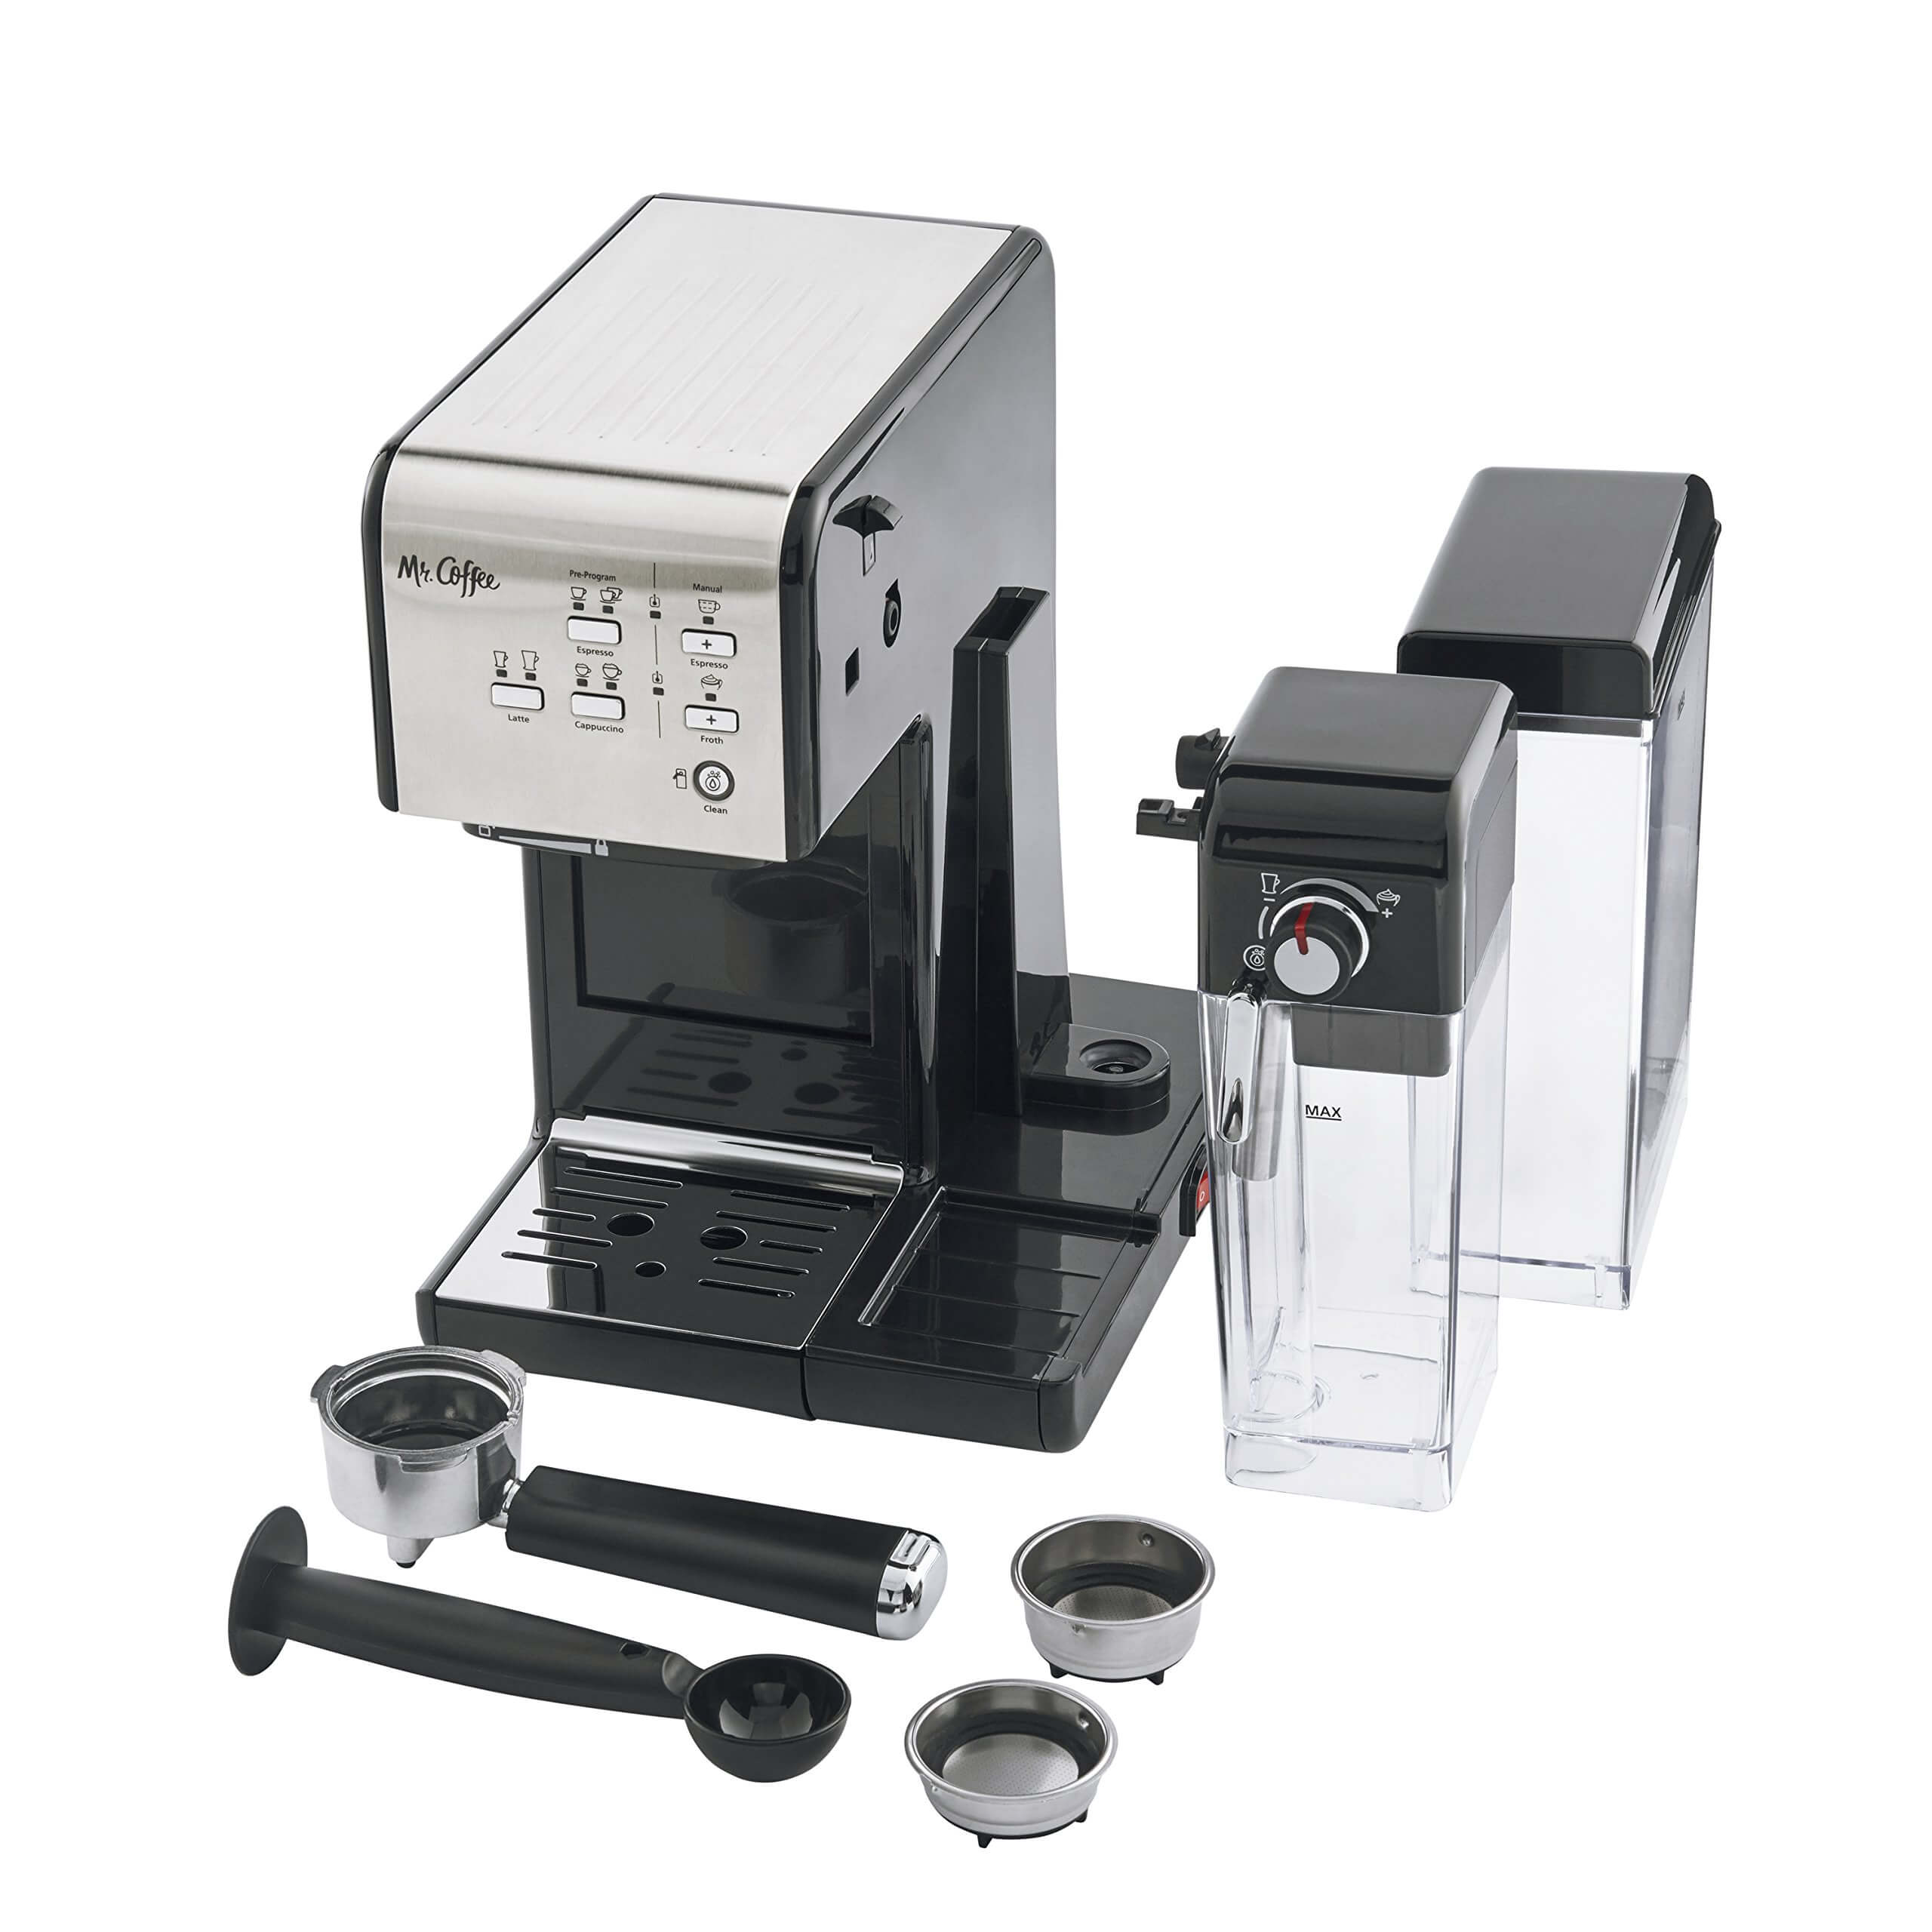 Coffee One-Touch CoffeeHouse Espresso Maker and Cappuccino Machine, best automatic latte machine for home, best espresso machine, mr.coffee latte maker, mr coffee cafe latte, mr coffee latte machine